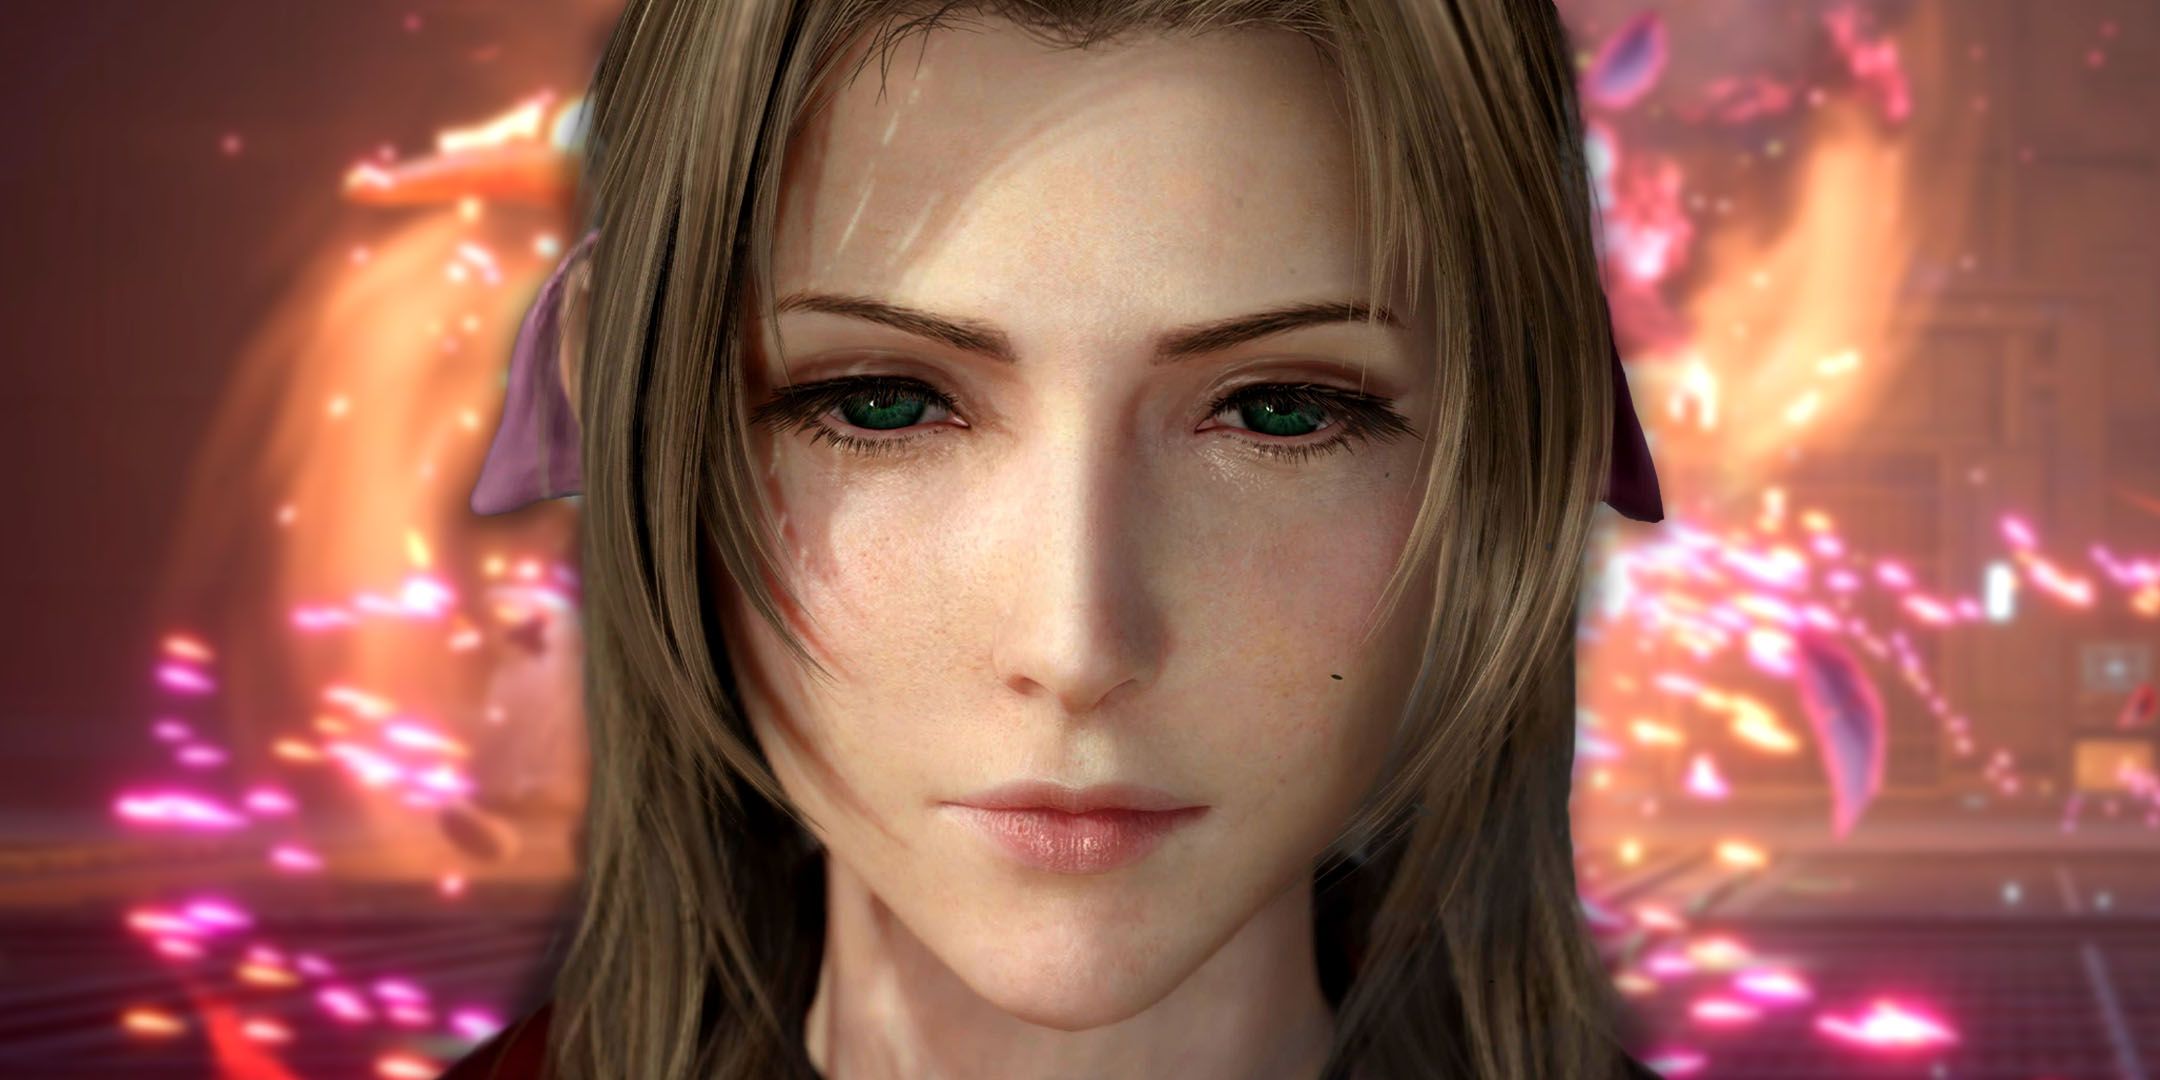 Aerith from FF7 Rebirth looking sad in front of an image of magical effects in combat.